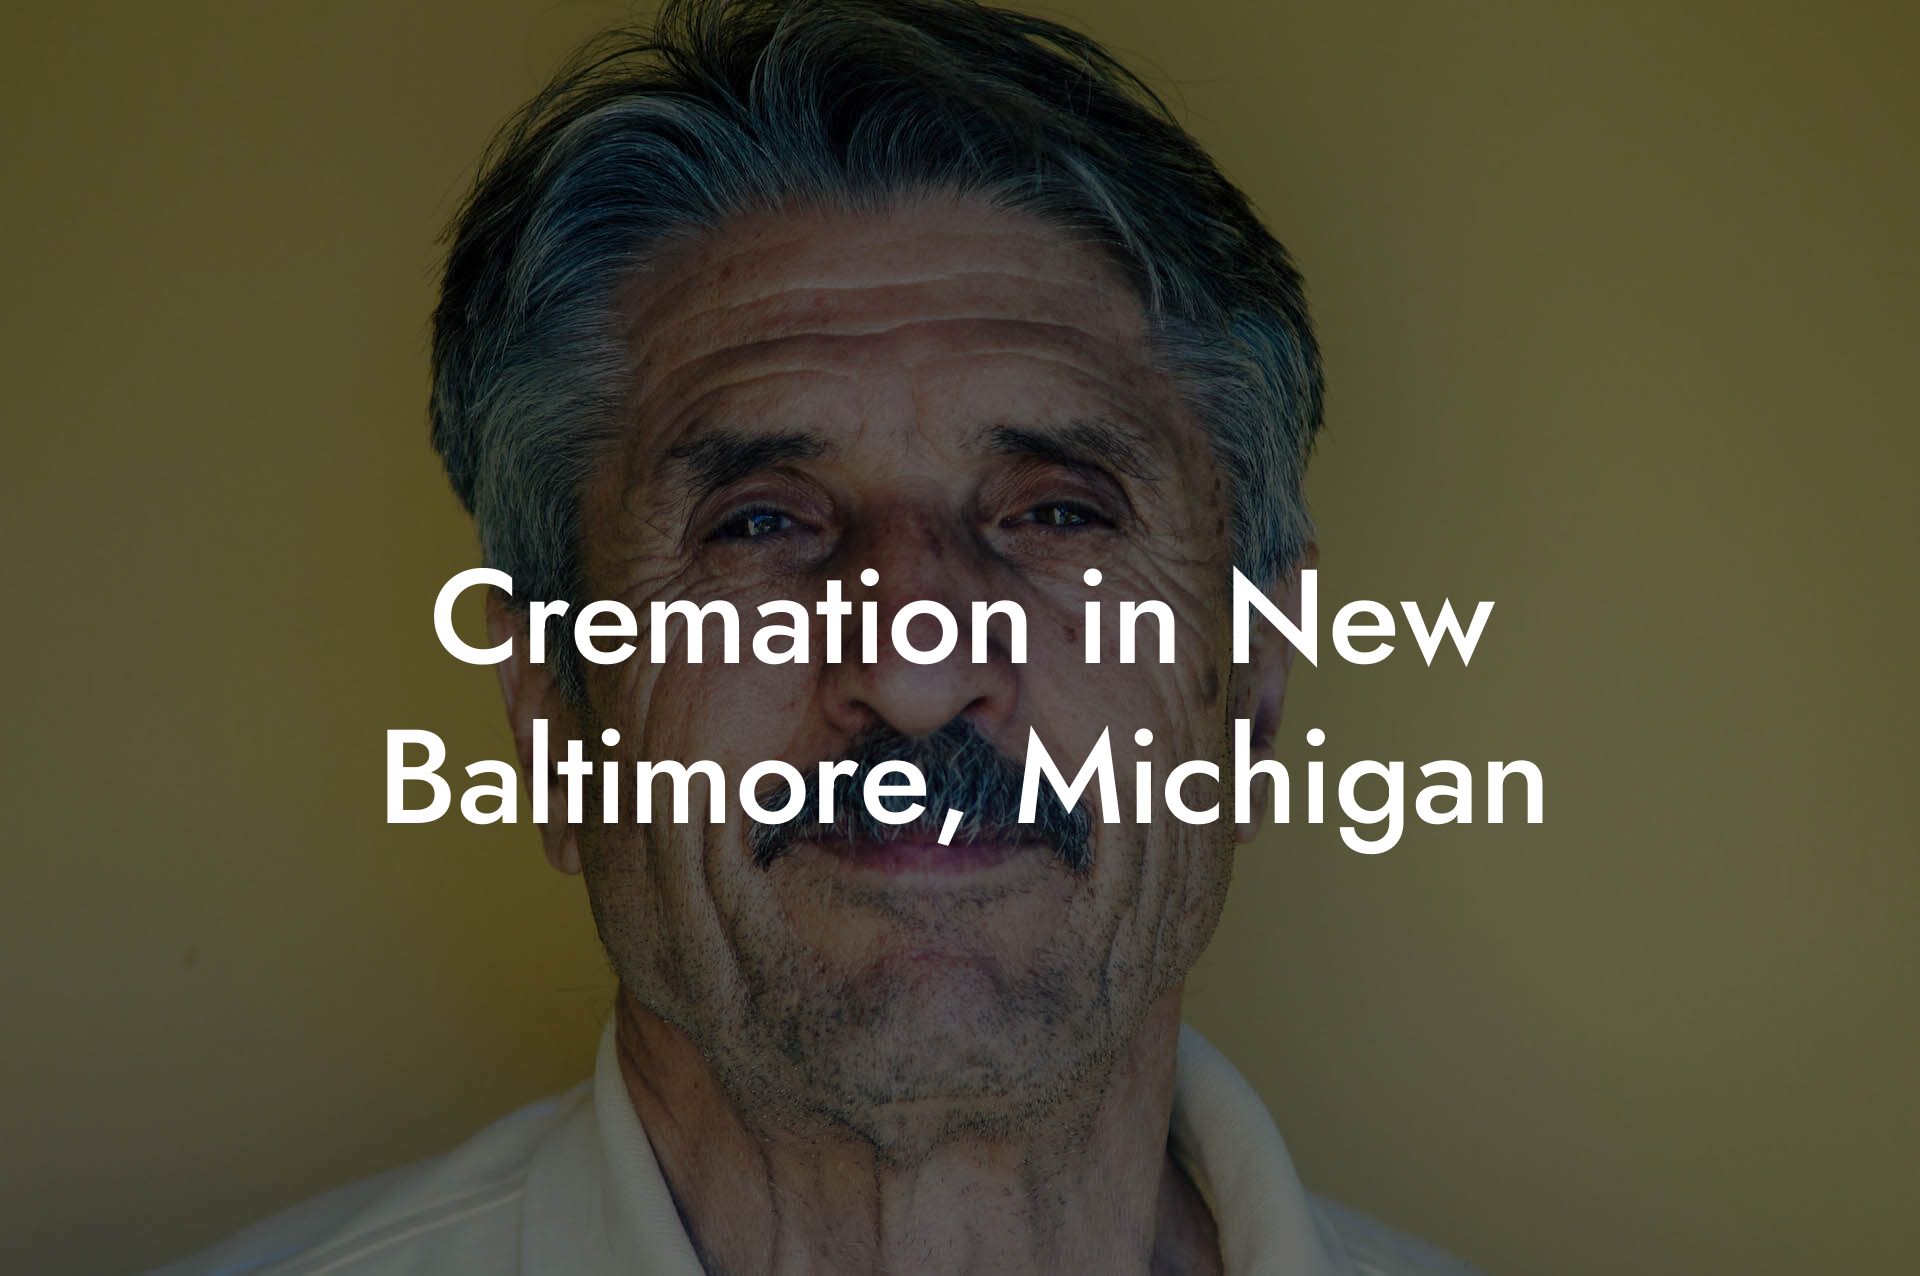 Cremation in New Baltimore, Michigan